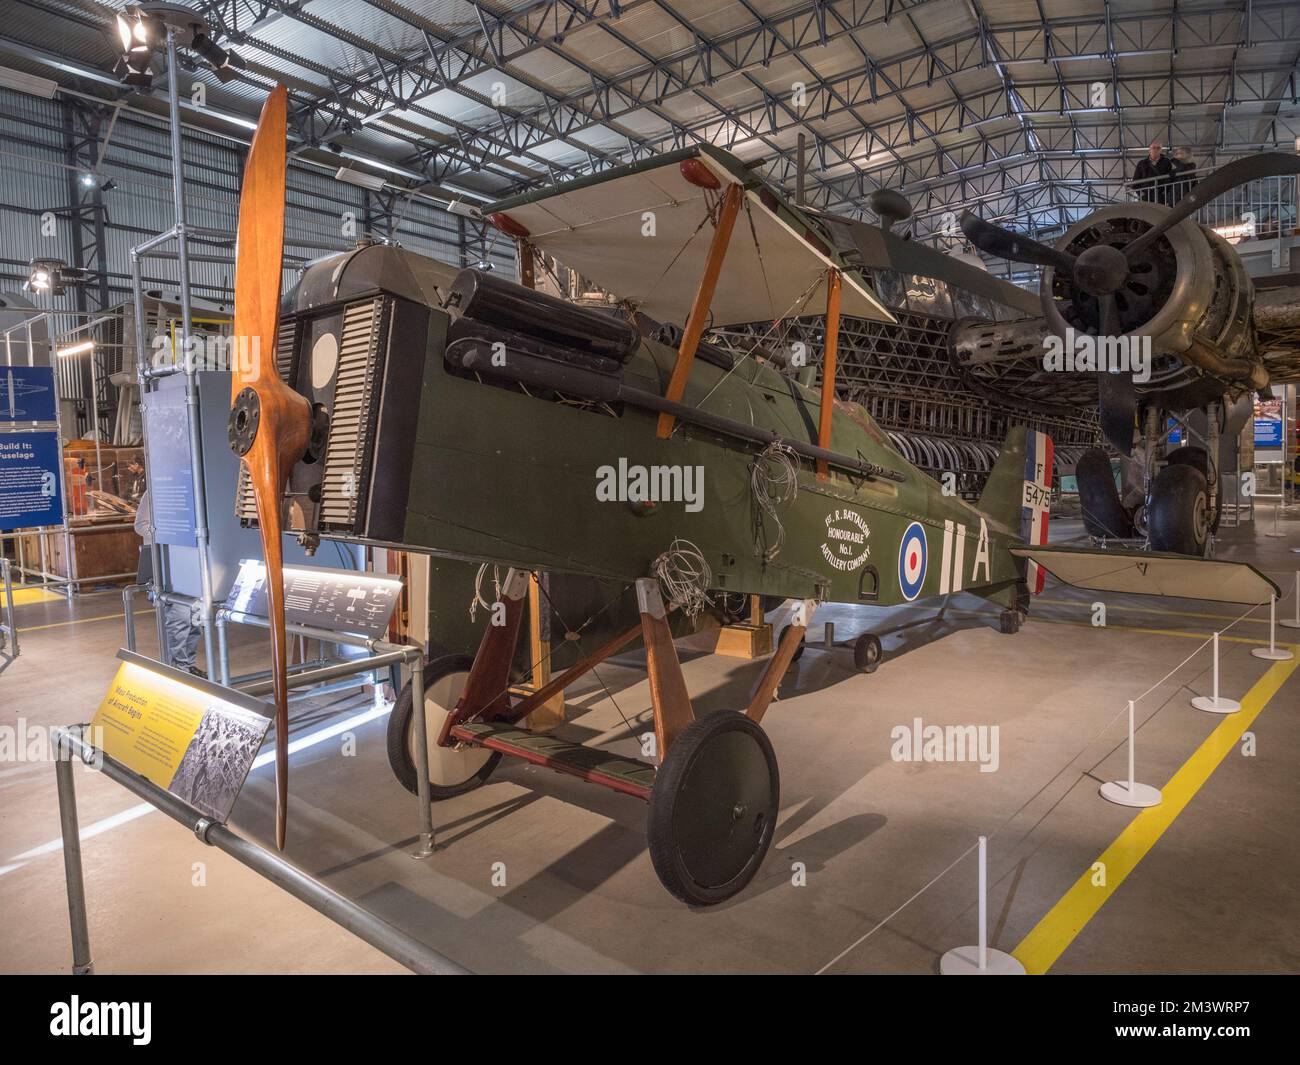 A Royal Aircraft Factory SE5a (replica), one of WWI key Allied fighter aircraft on display in the Bellman Hanger, Brooklands Museum, Surrey, UK. Stock Photo